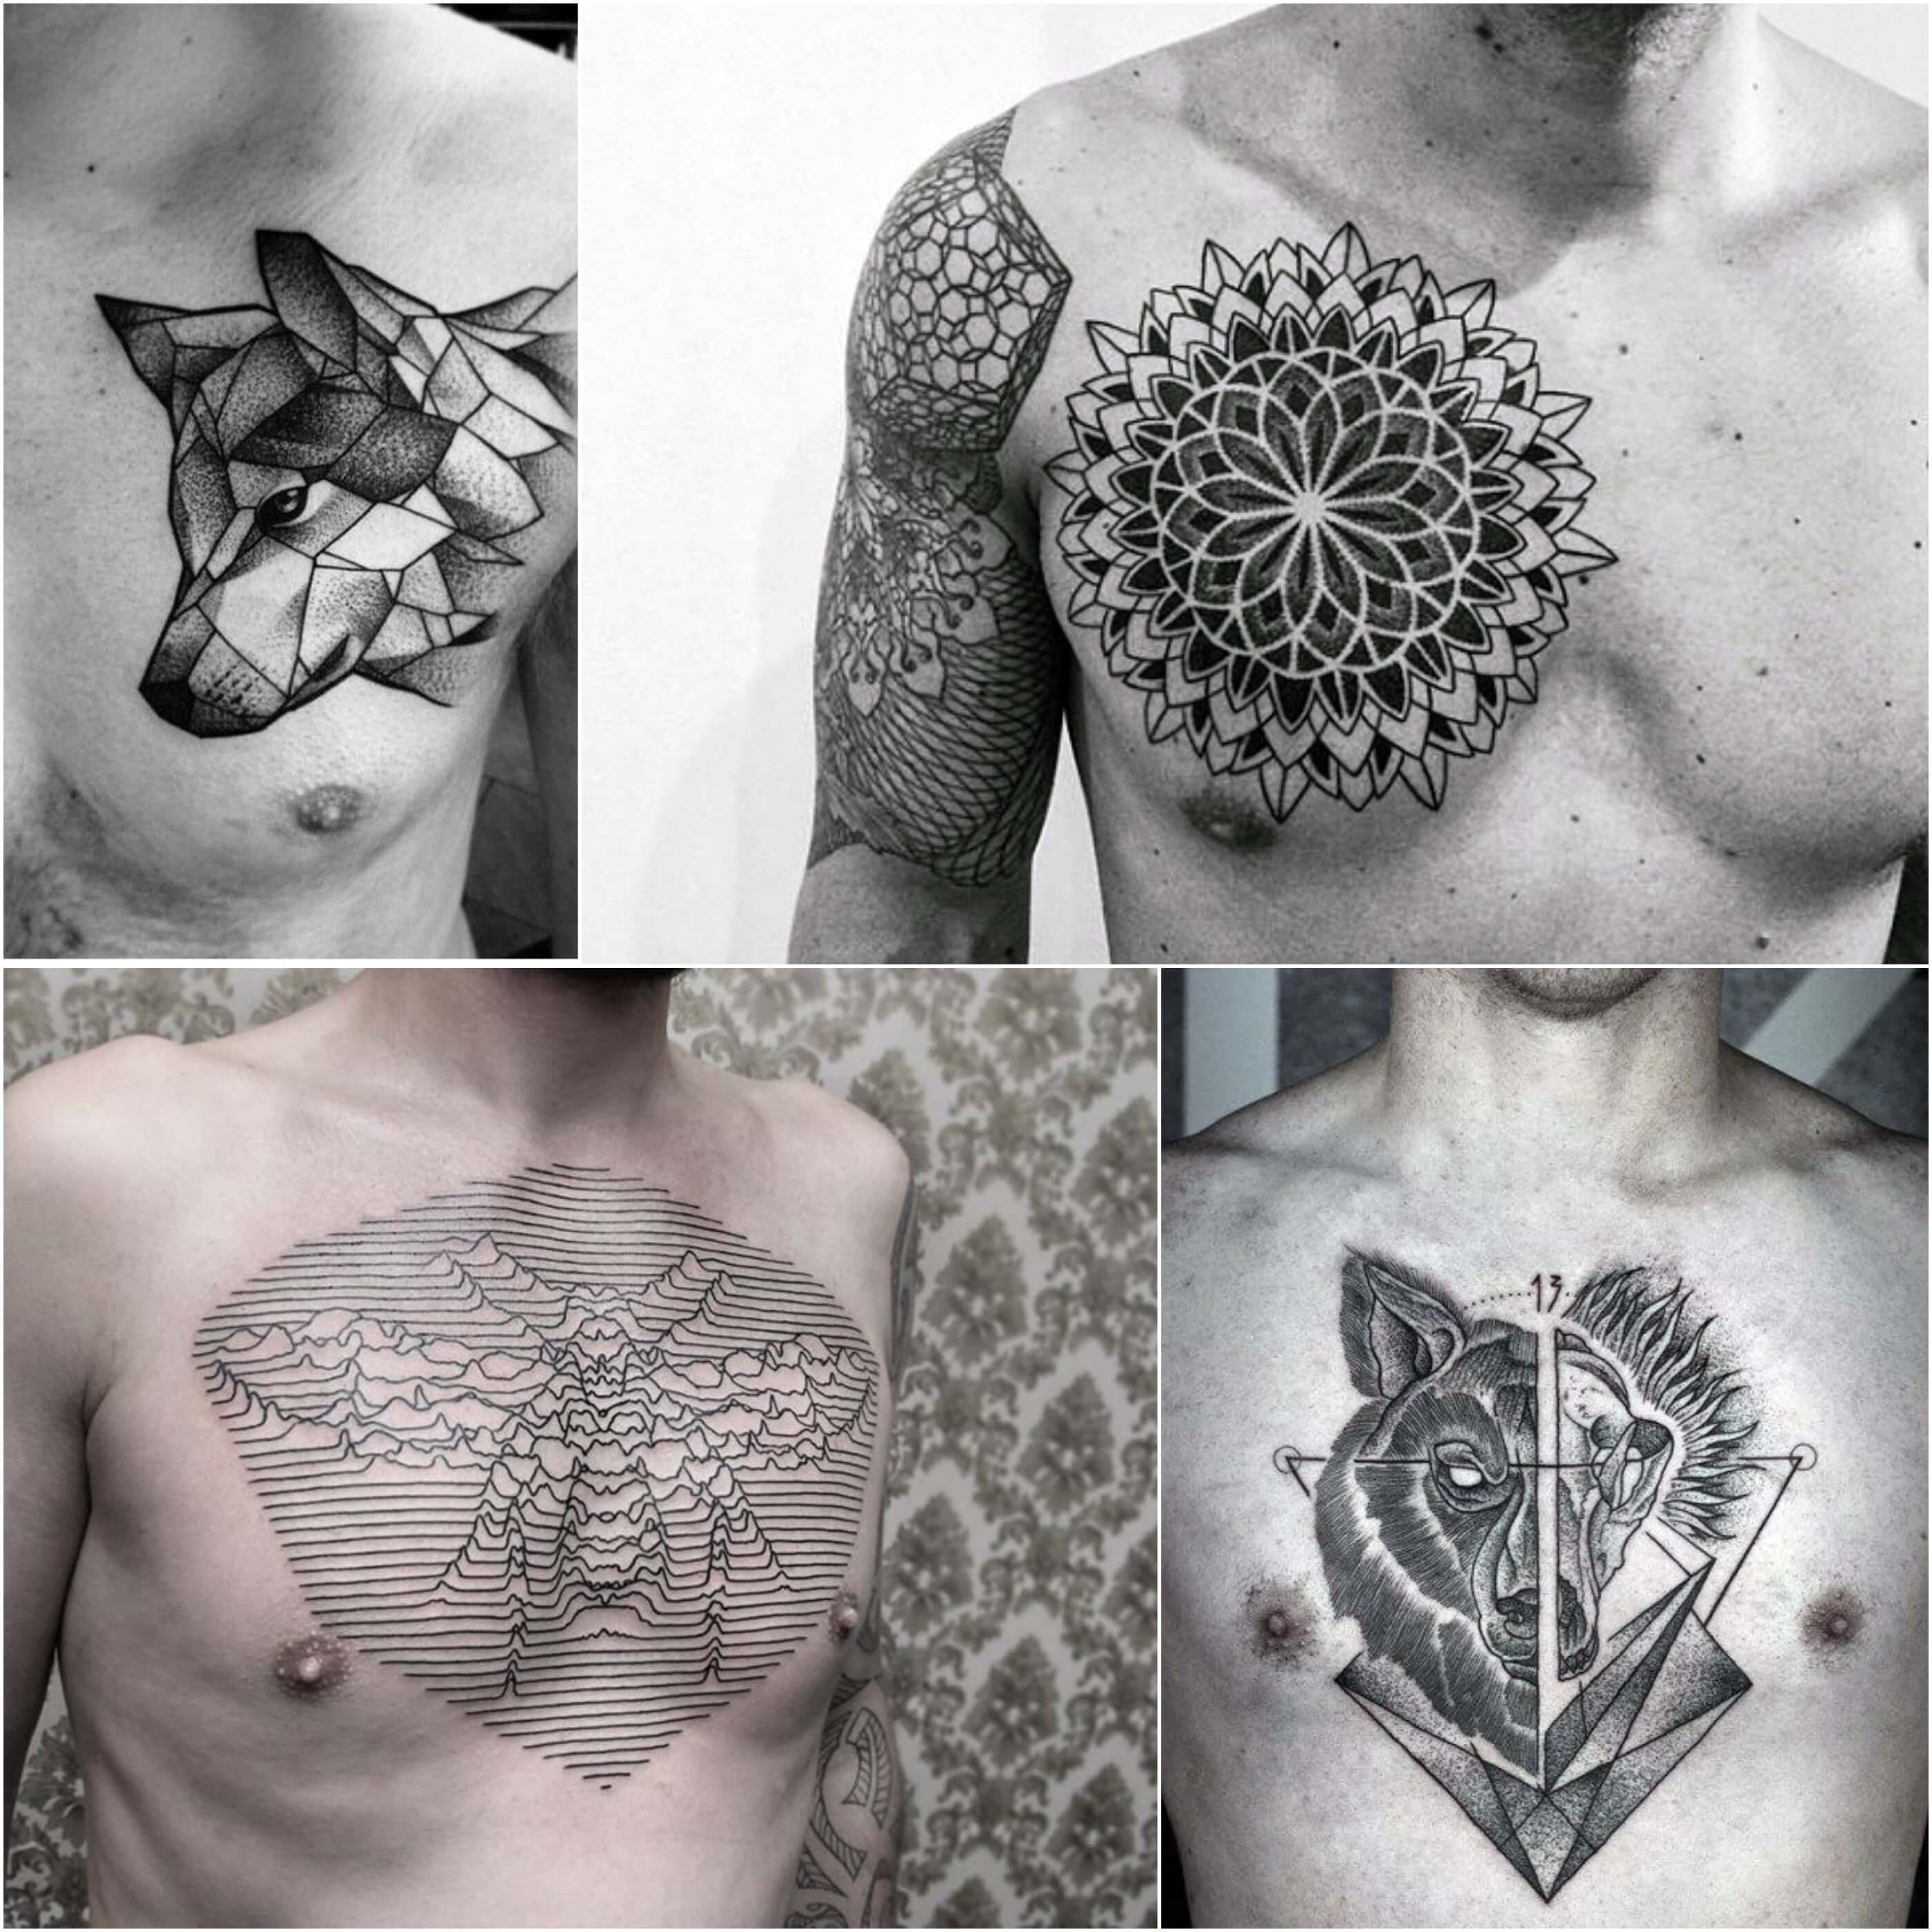 100 Best Chest Tattoos For Men Chest Tattoo Gallery For Men intended for sizing 2800 X 2800